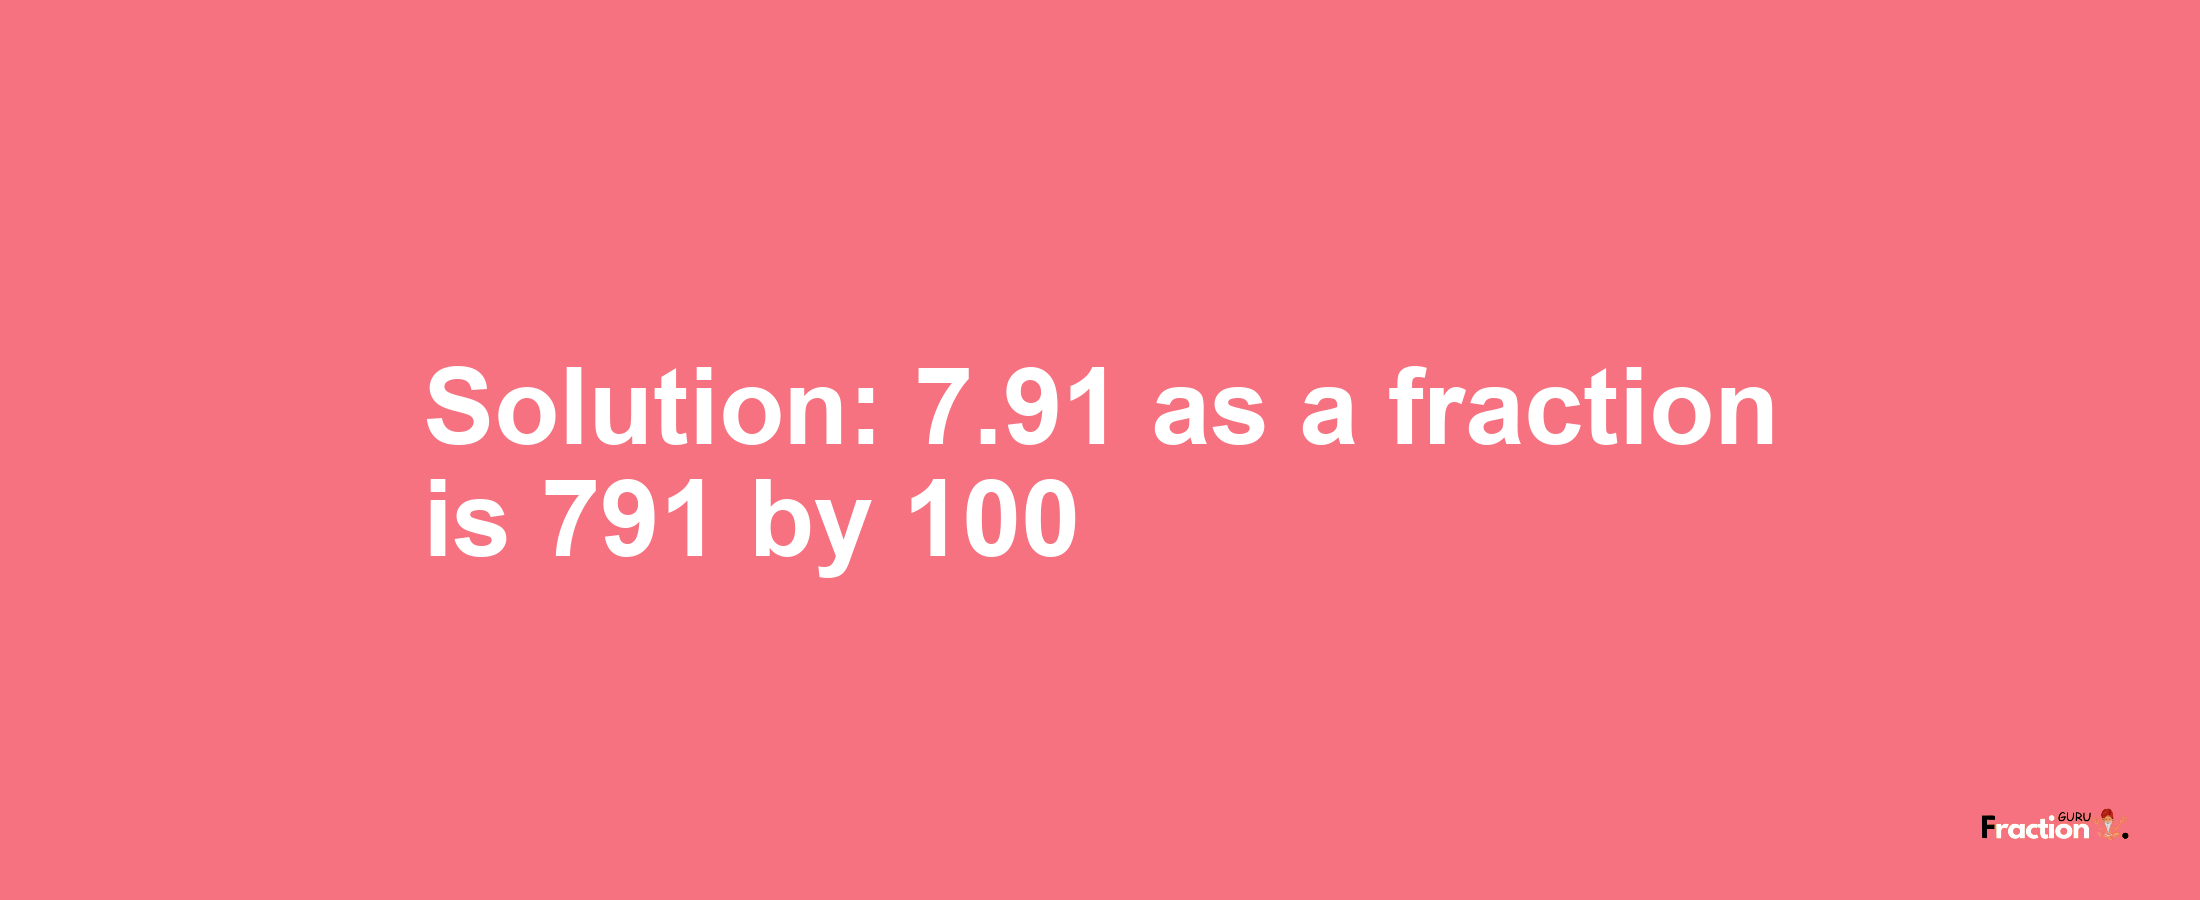 Solution:7.91 as a fraction is 791/100